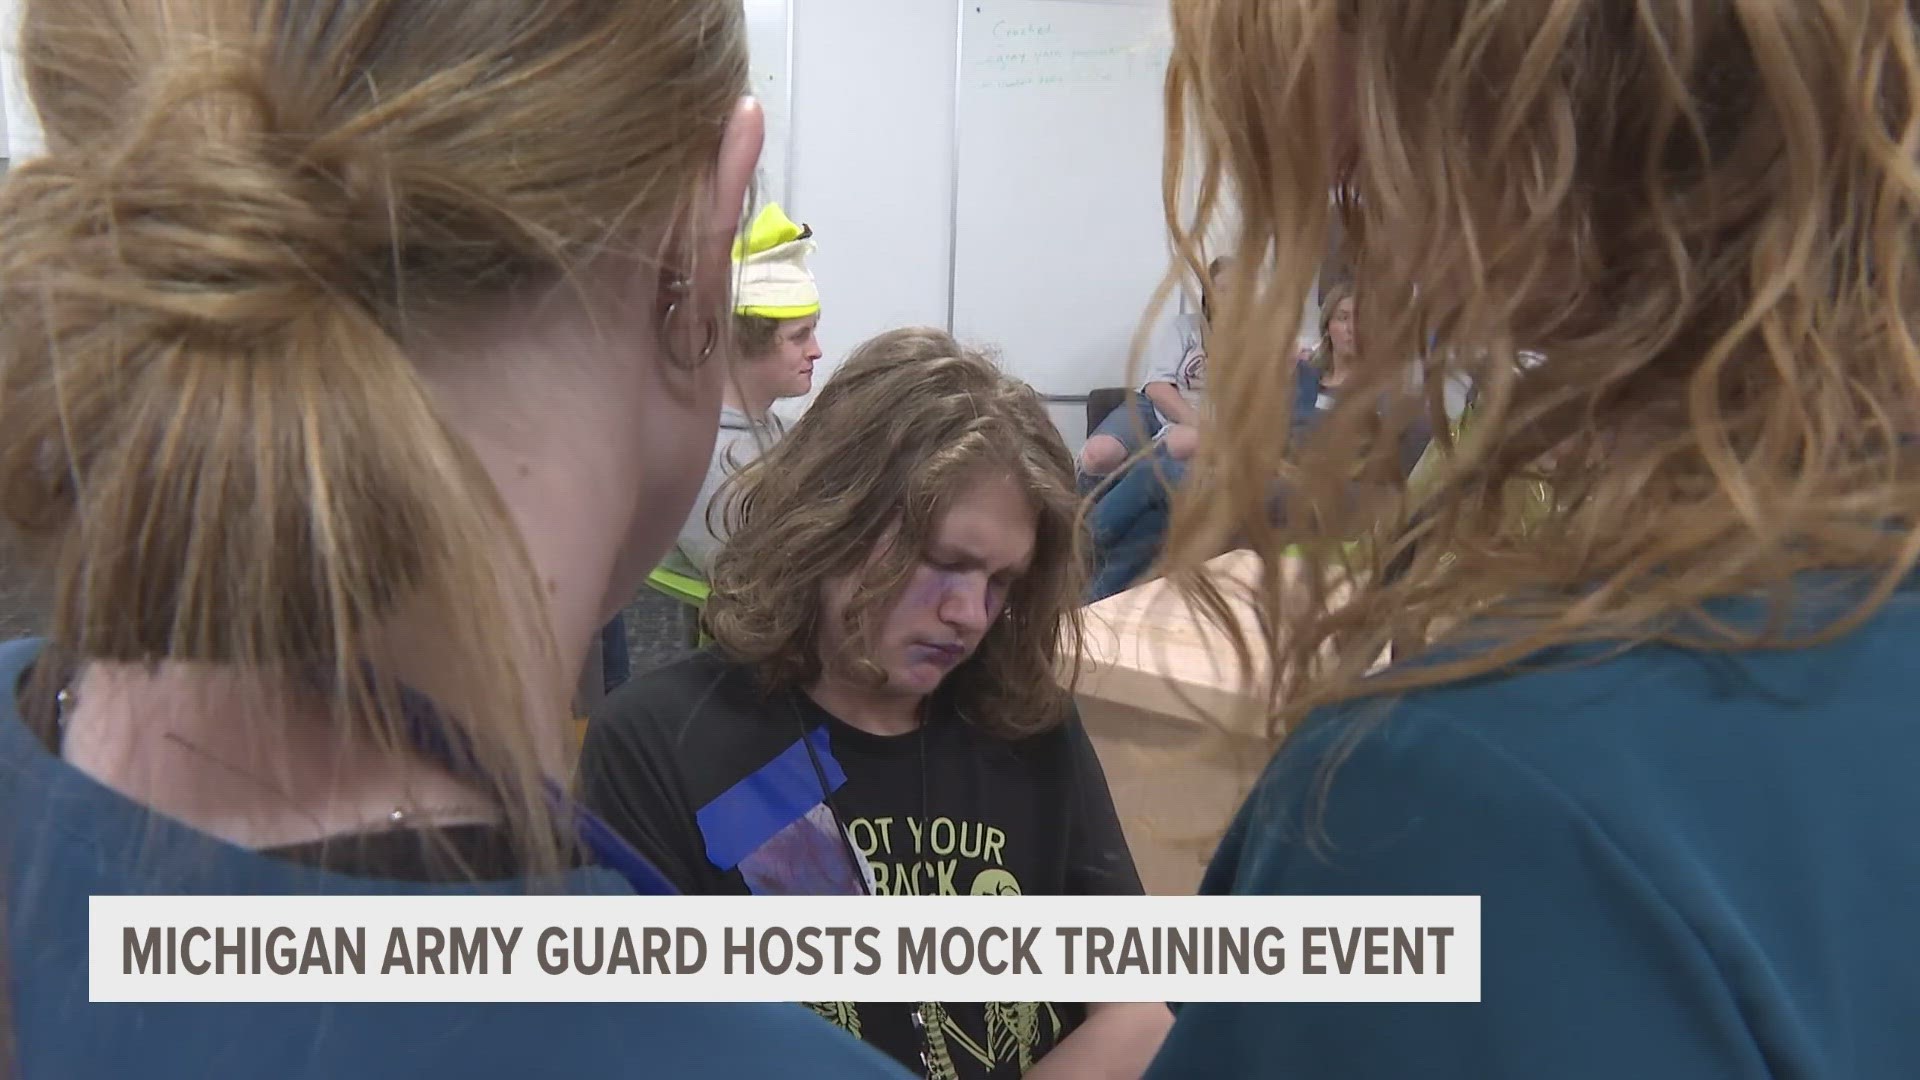 The event was put on in partnership with the Michigan Army National Guard.